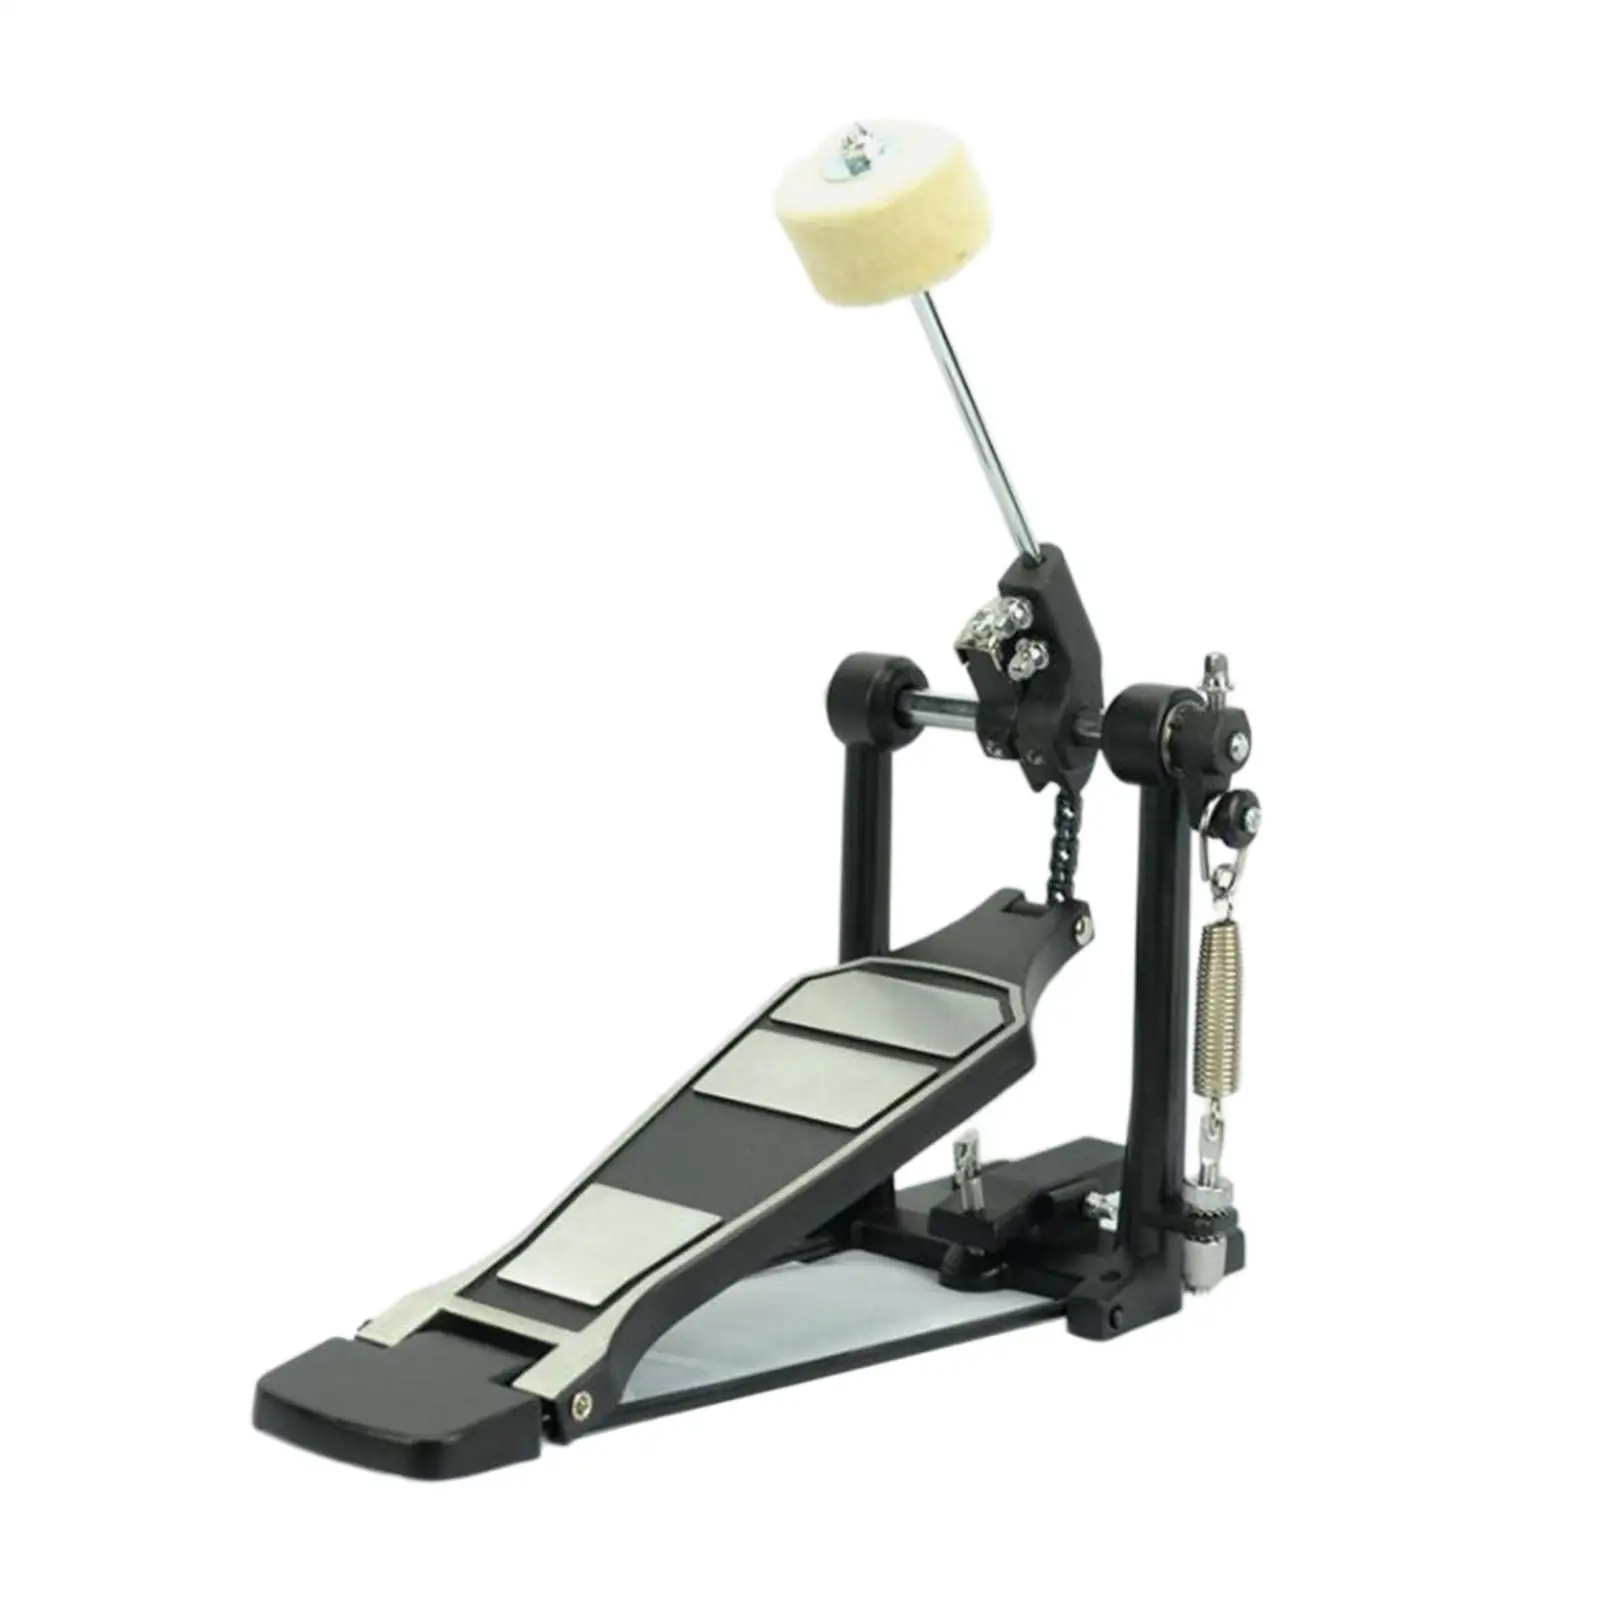 Bass Drum Pedal Drum Practice Instrument Accessories for Beginner, Pro Drummers Chain Drive Drum Step Drum Foot Pedal Beater